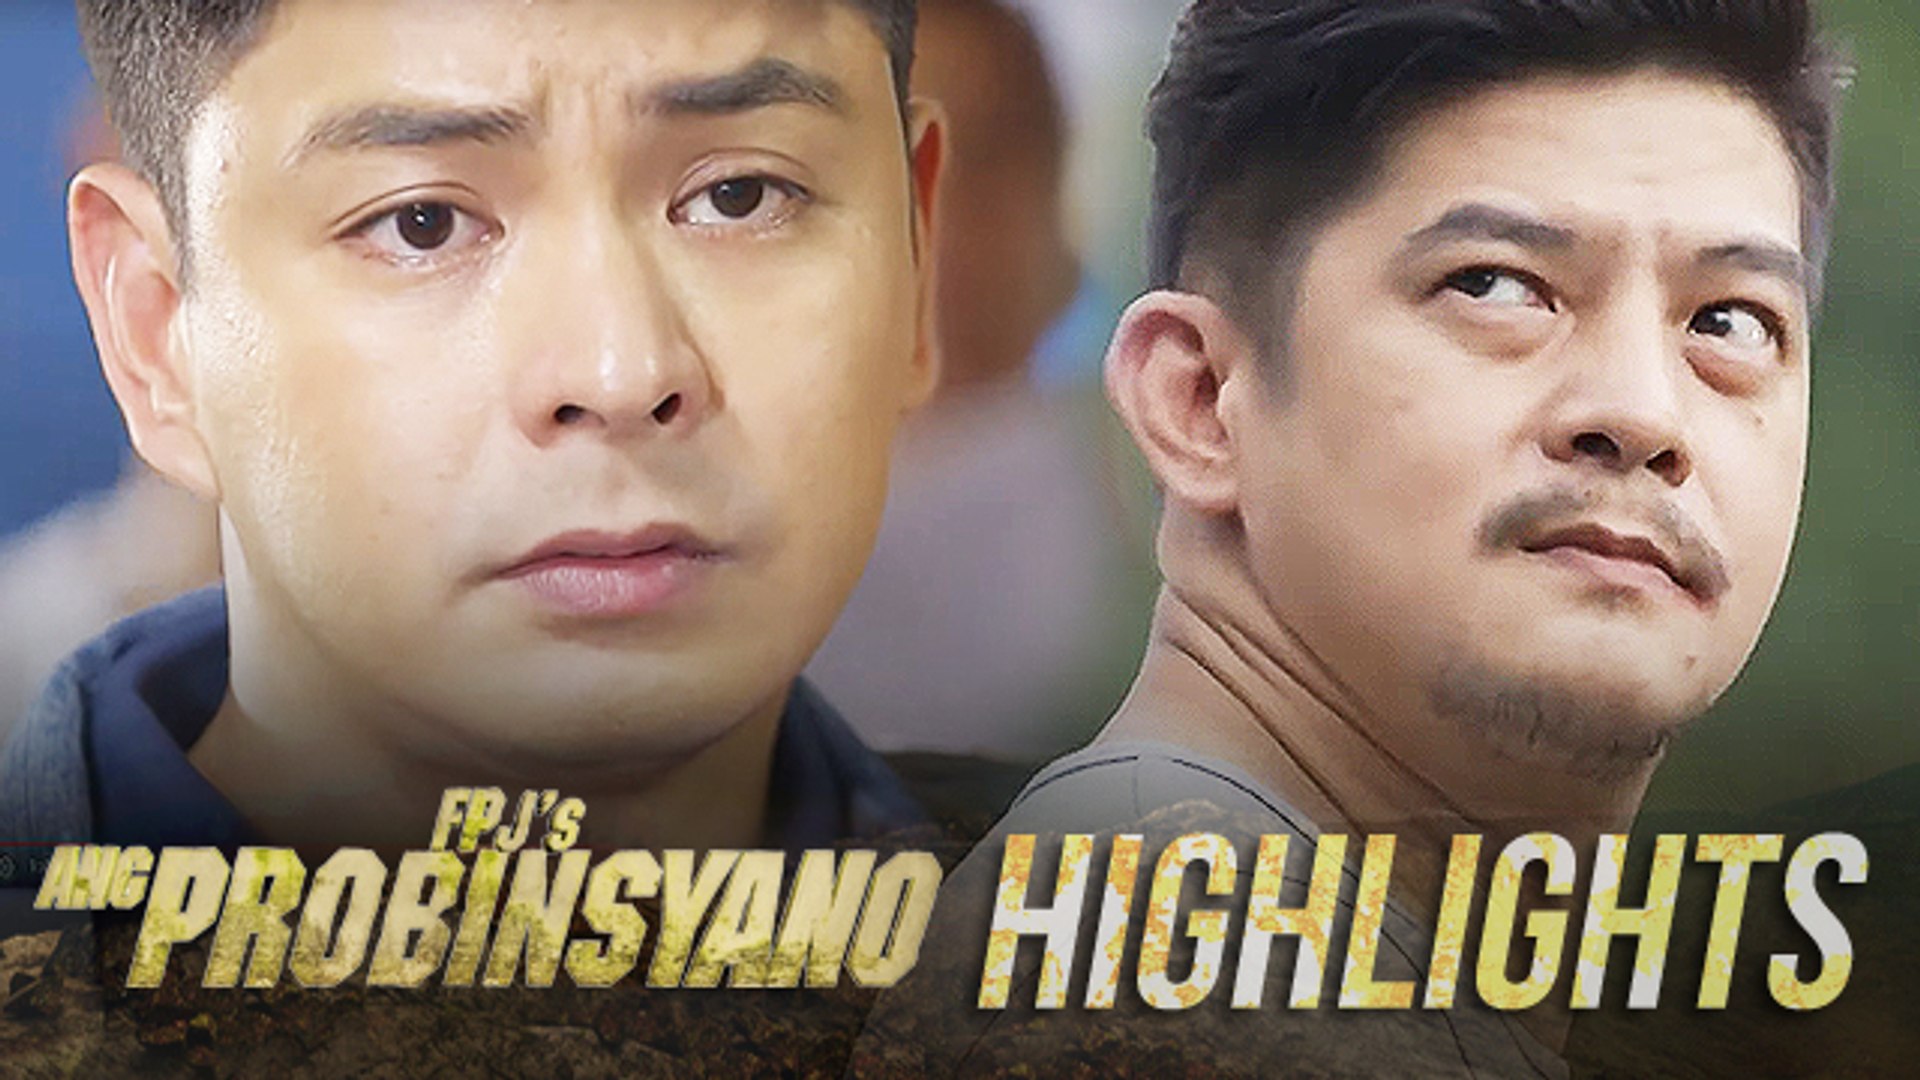 Juan is ready for his plans against Cardo | FPJ's Ang Probinsyano